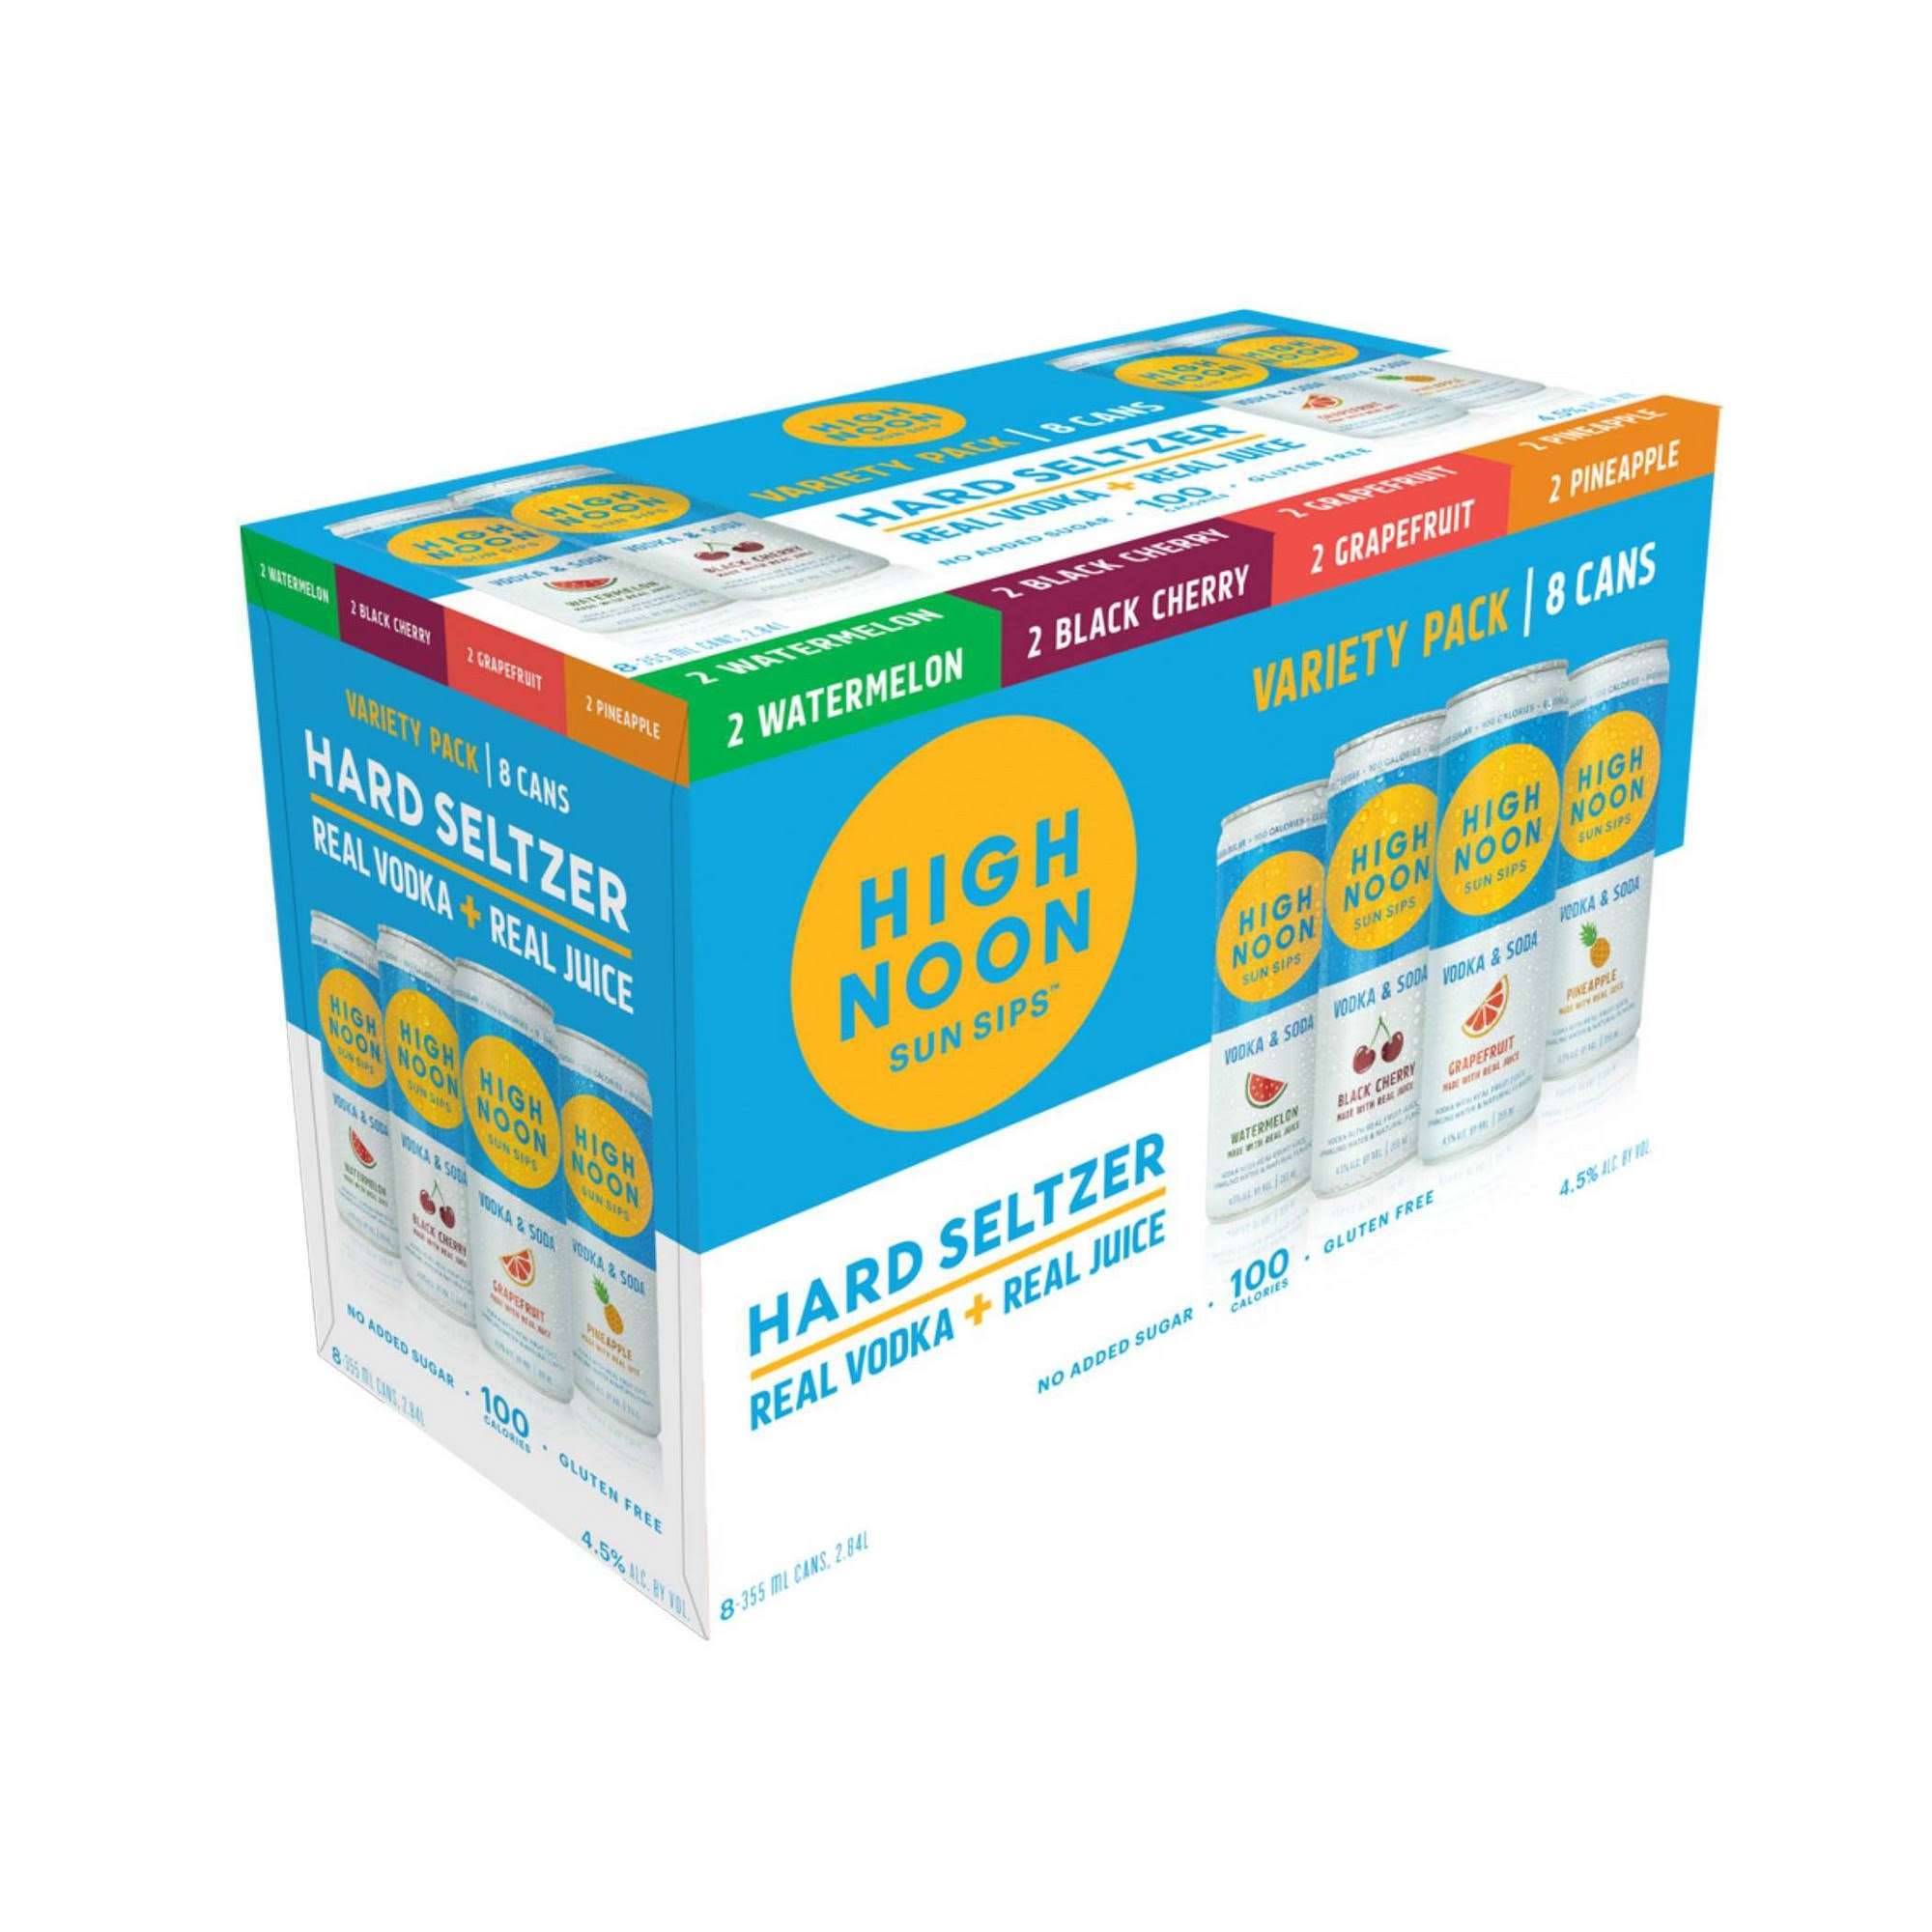 High Noon Sun Sips Hard Seltzer, Variety Pack - 8 pack, 355 ml cans